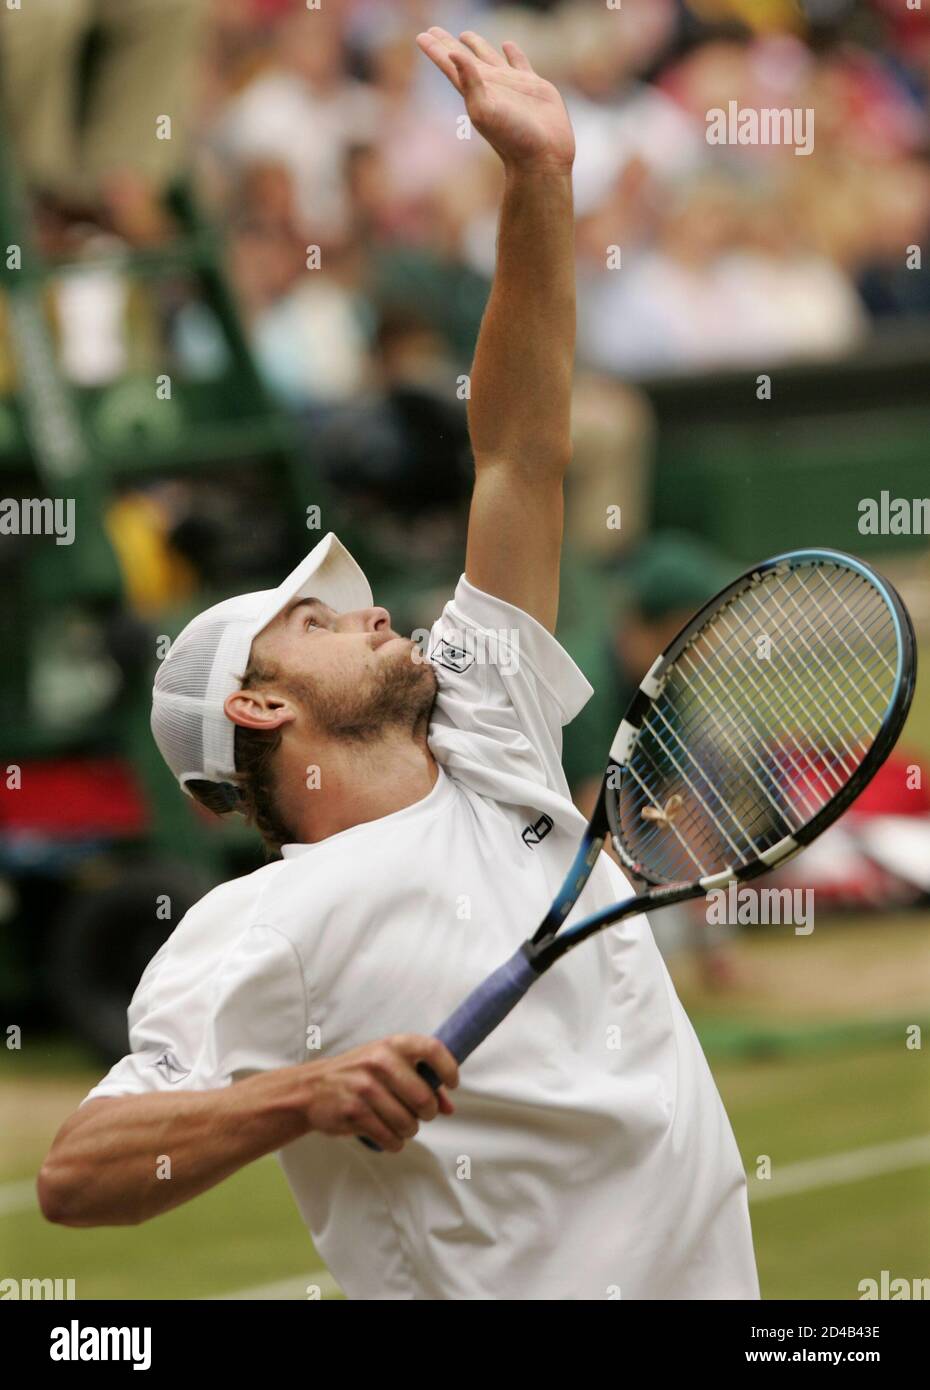 Second seed Andy Roddick of the U.S. serves to top seed Roger Federer of  Switzerland during their men's singles final match on Centre Court at the  Wimbledon Tennis Championships in London, July